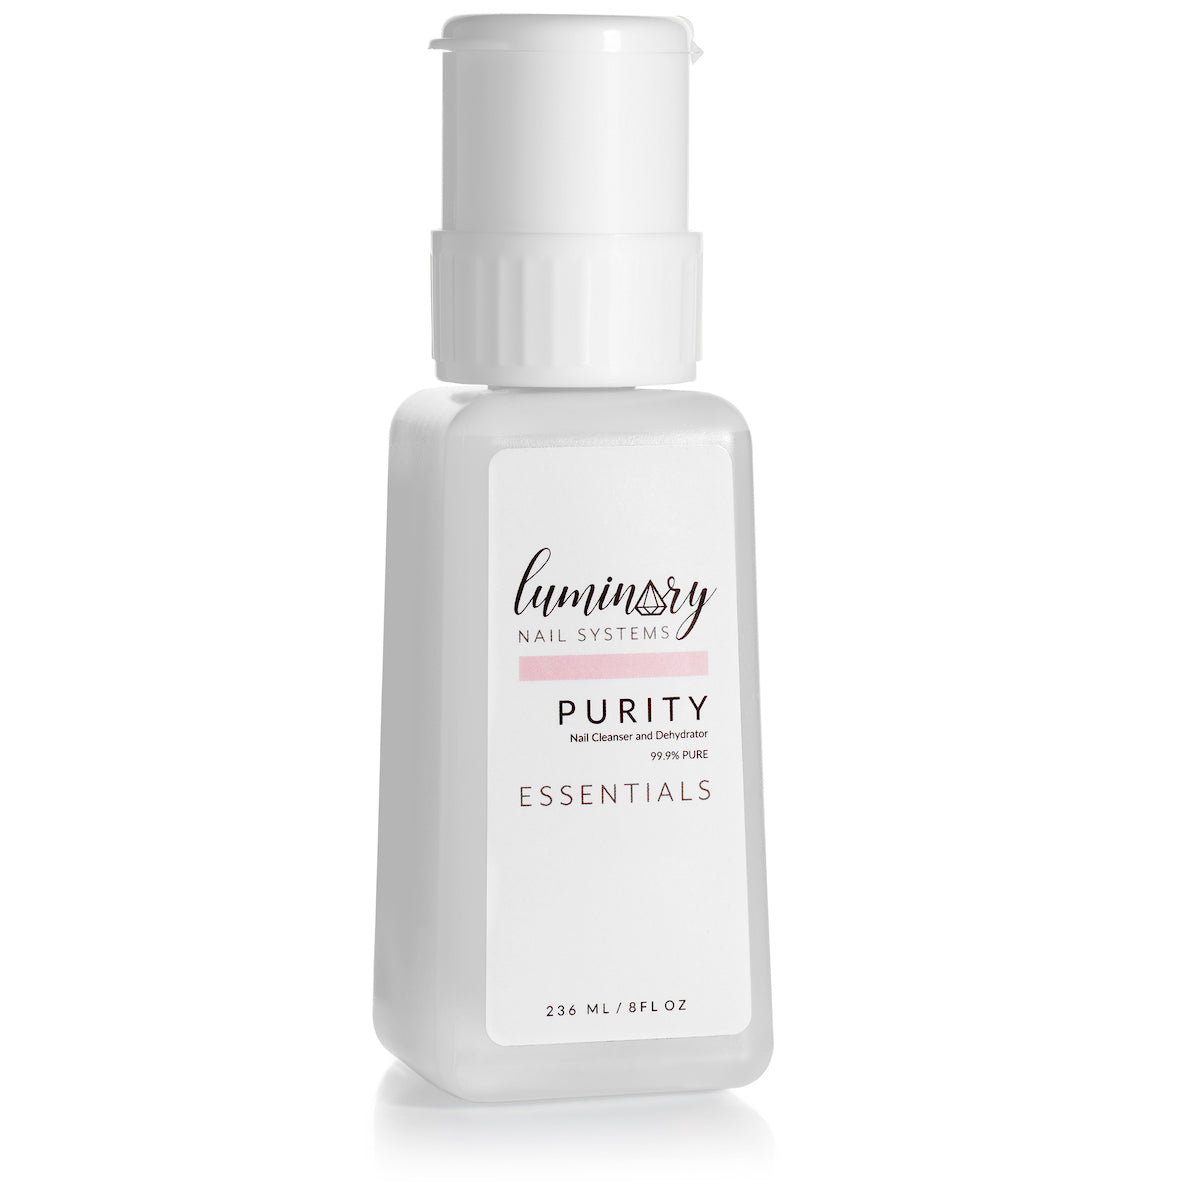 *NEW* PURITY Nail Cleanser and Dehydrator